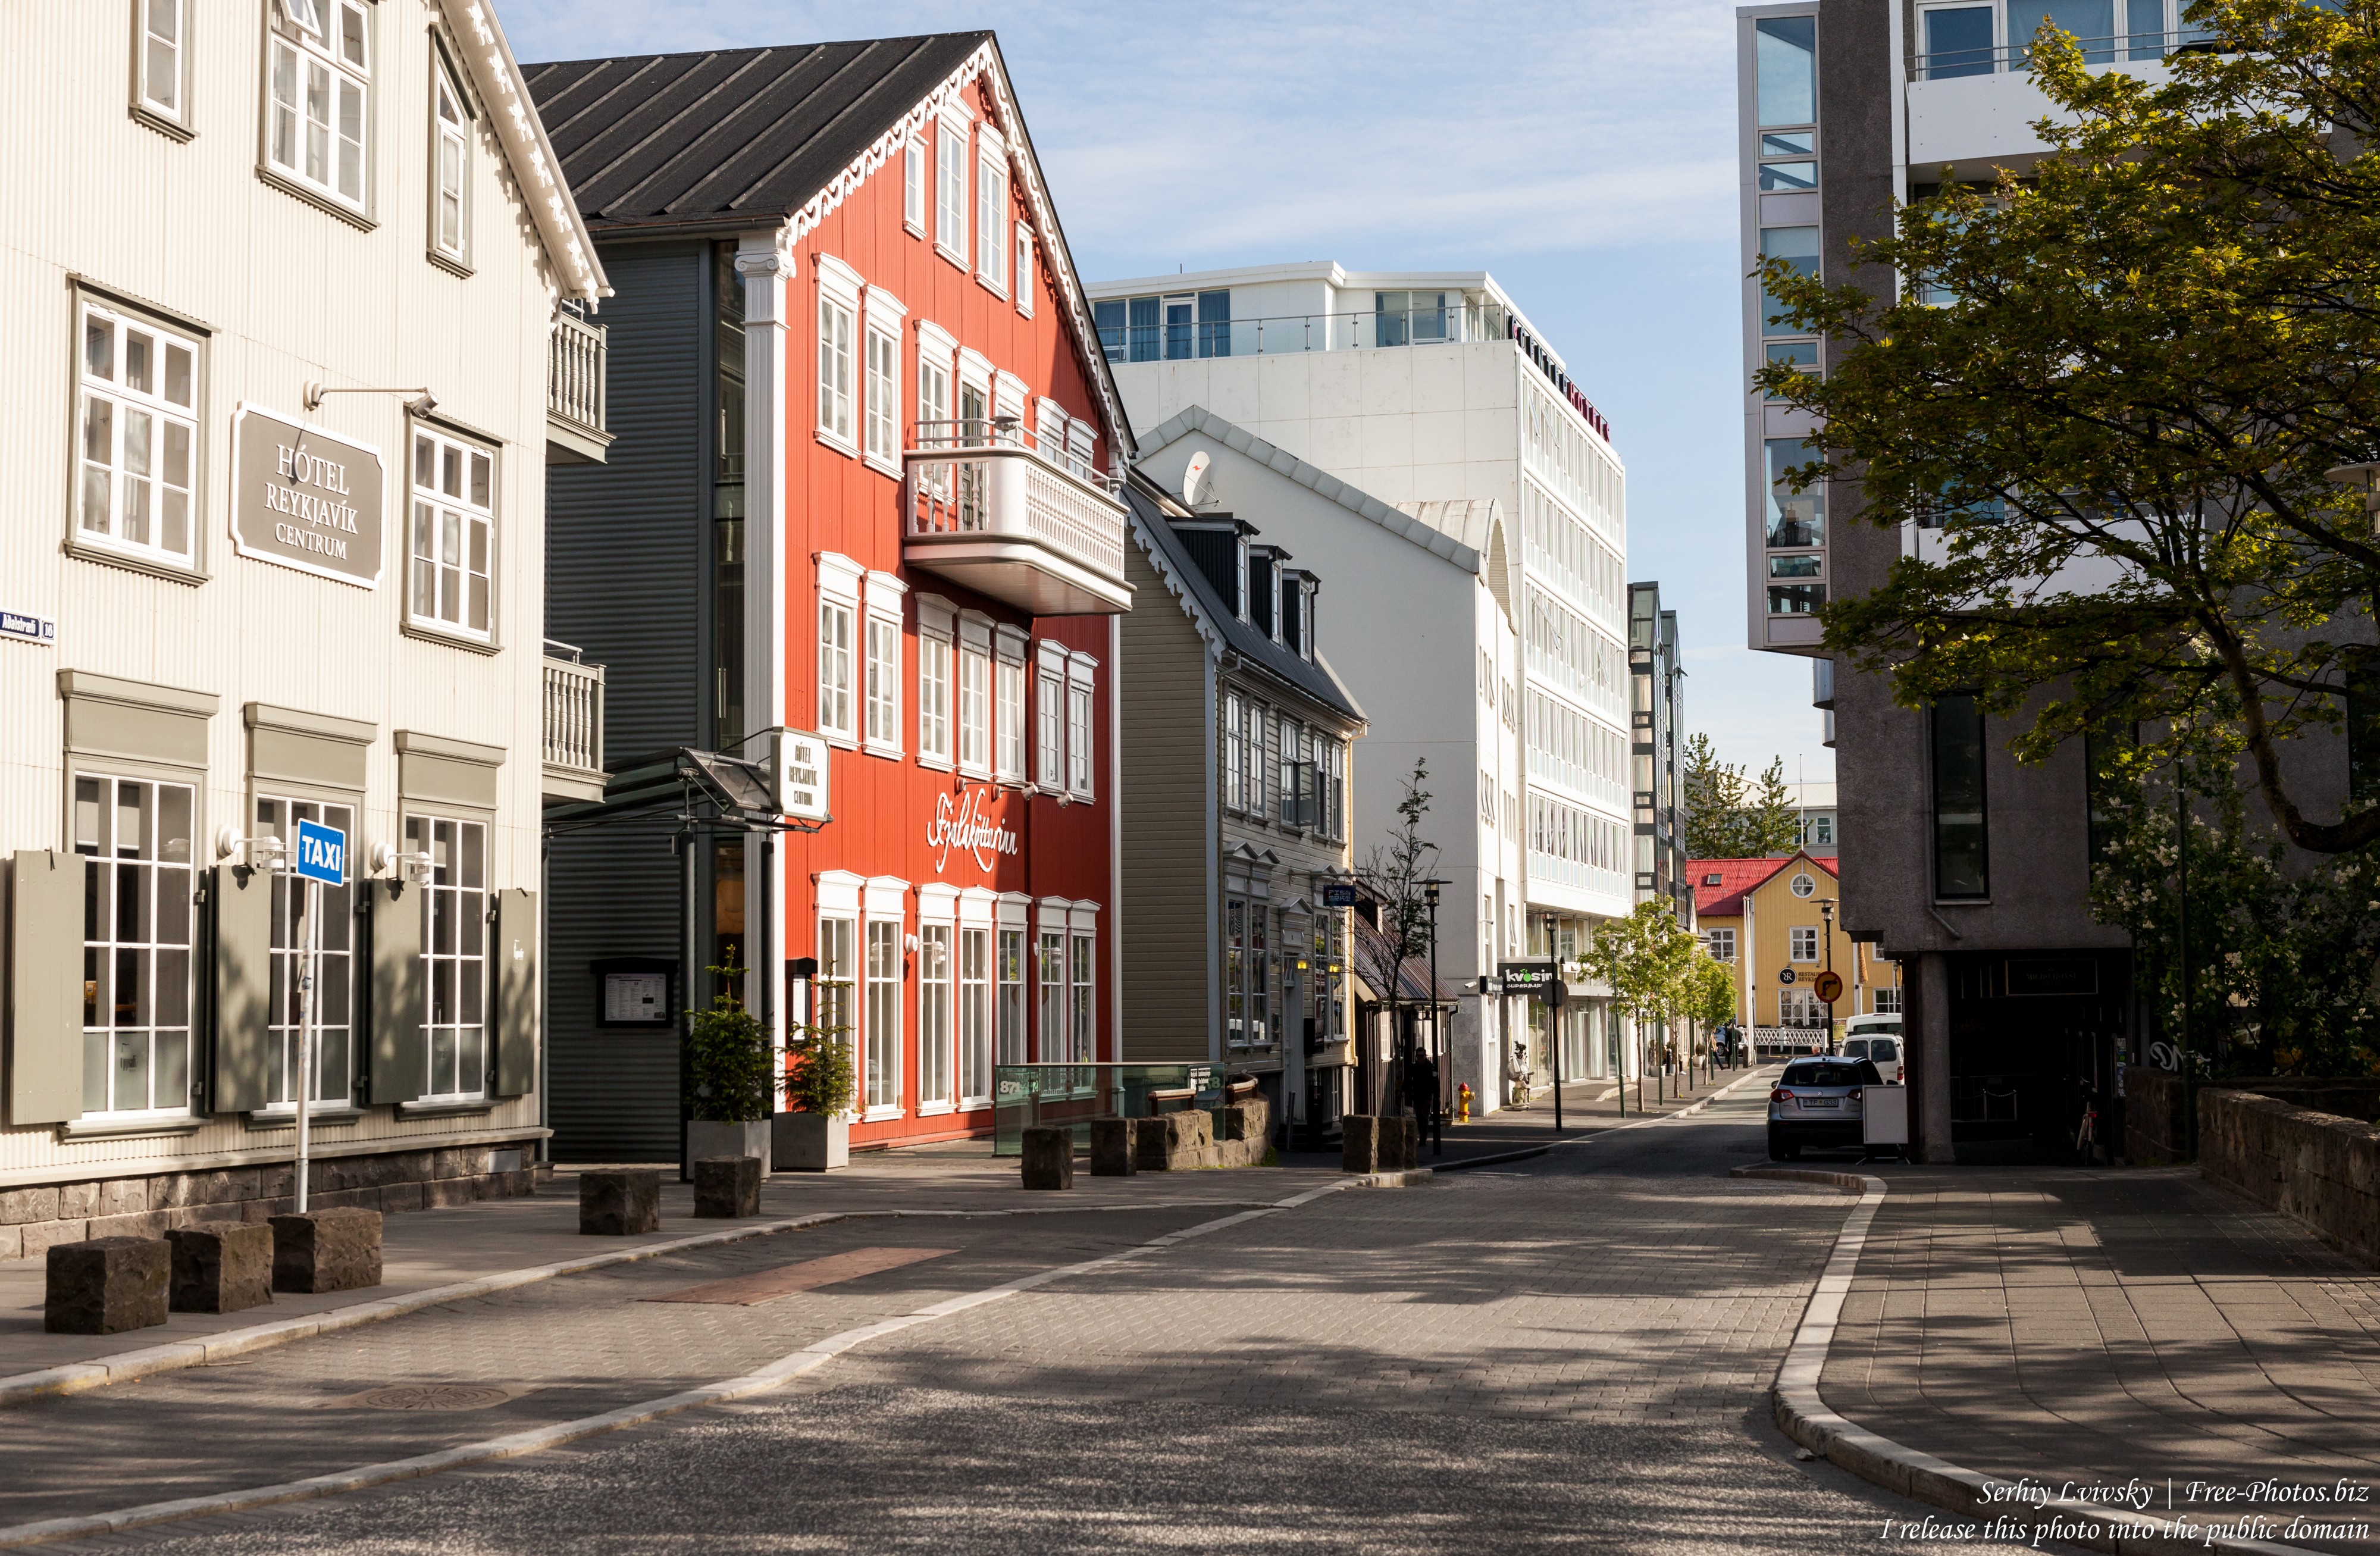 Reykjavik, Iceland, photographed in May 2019 by Serhiy Lvivsky, picture 75